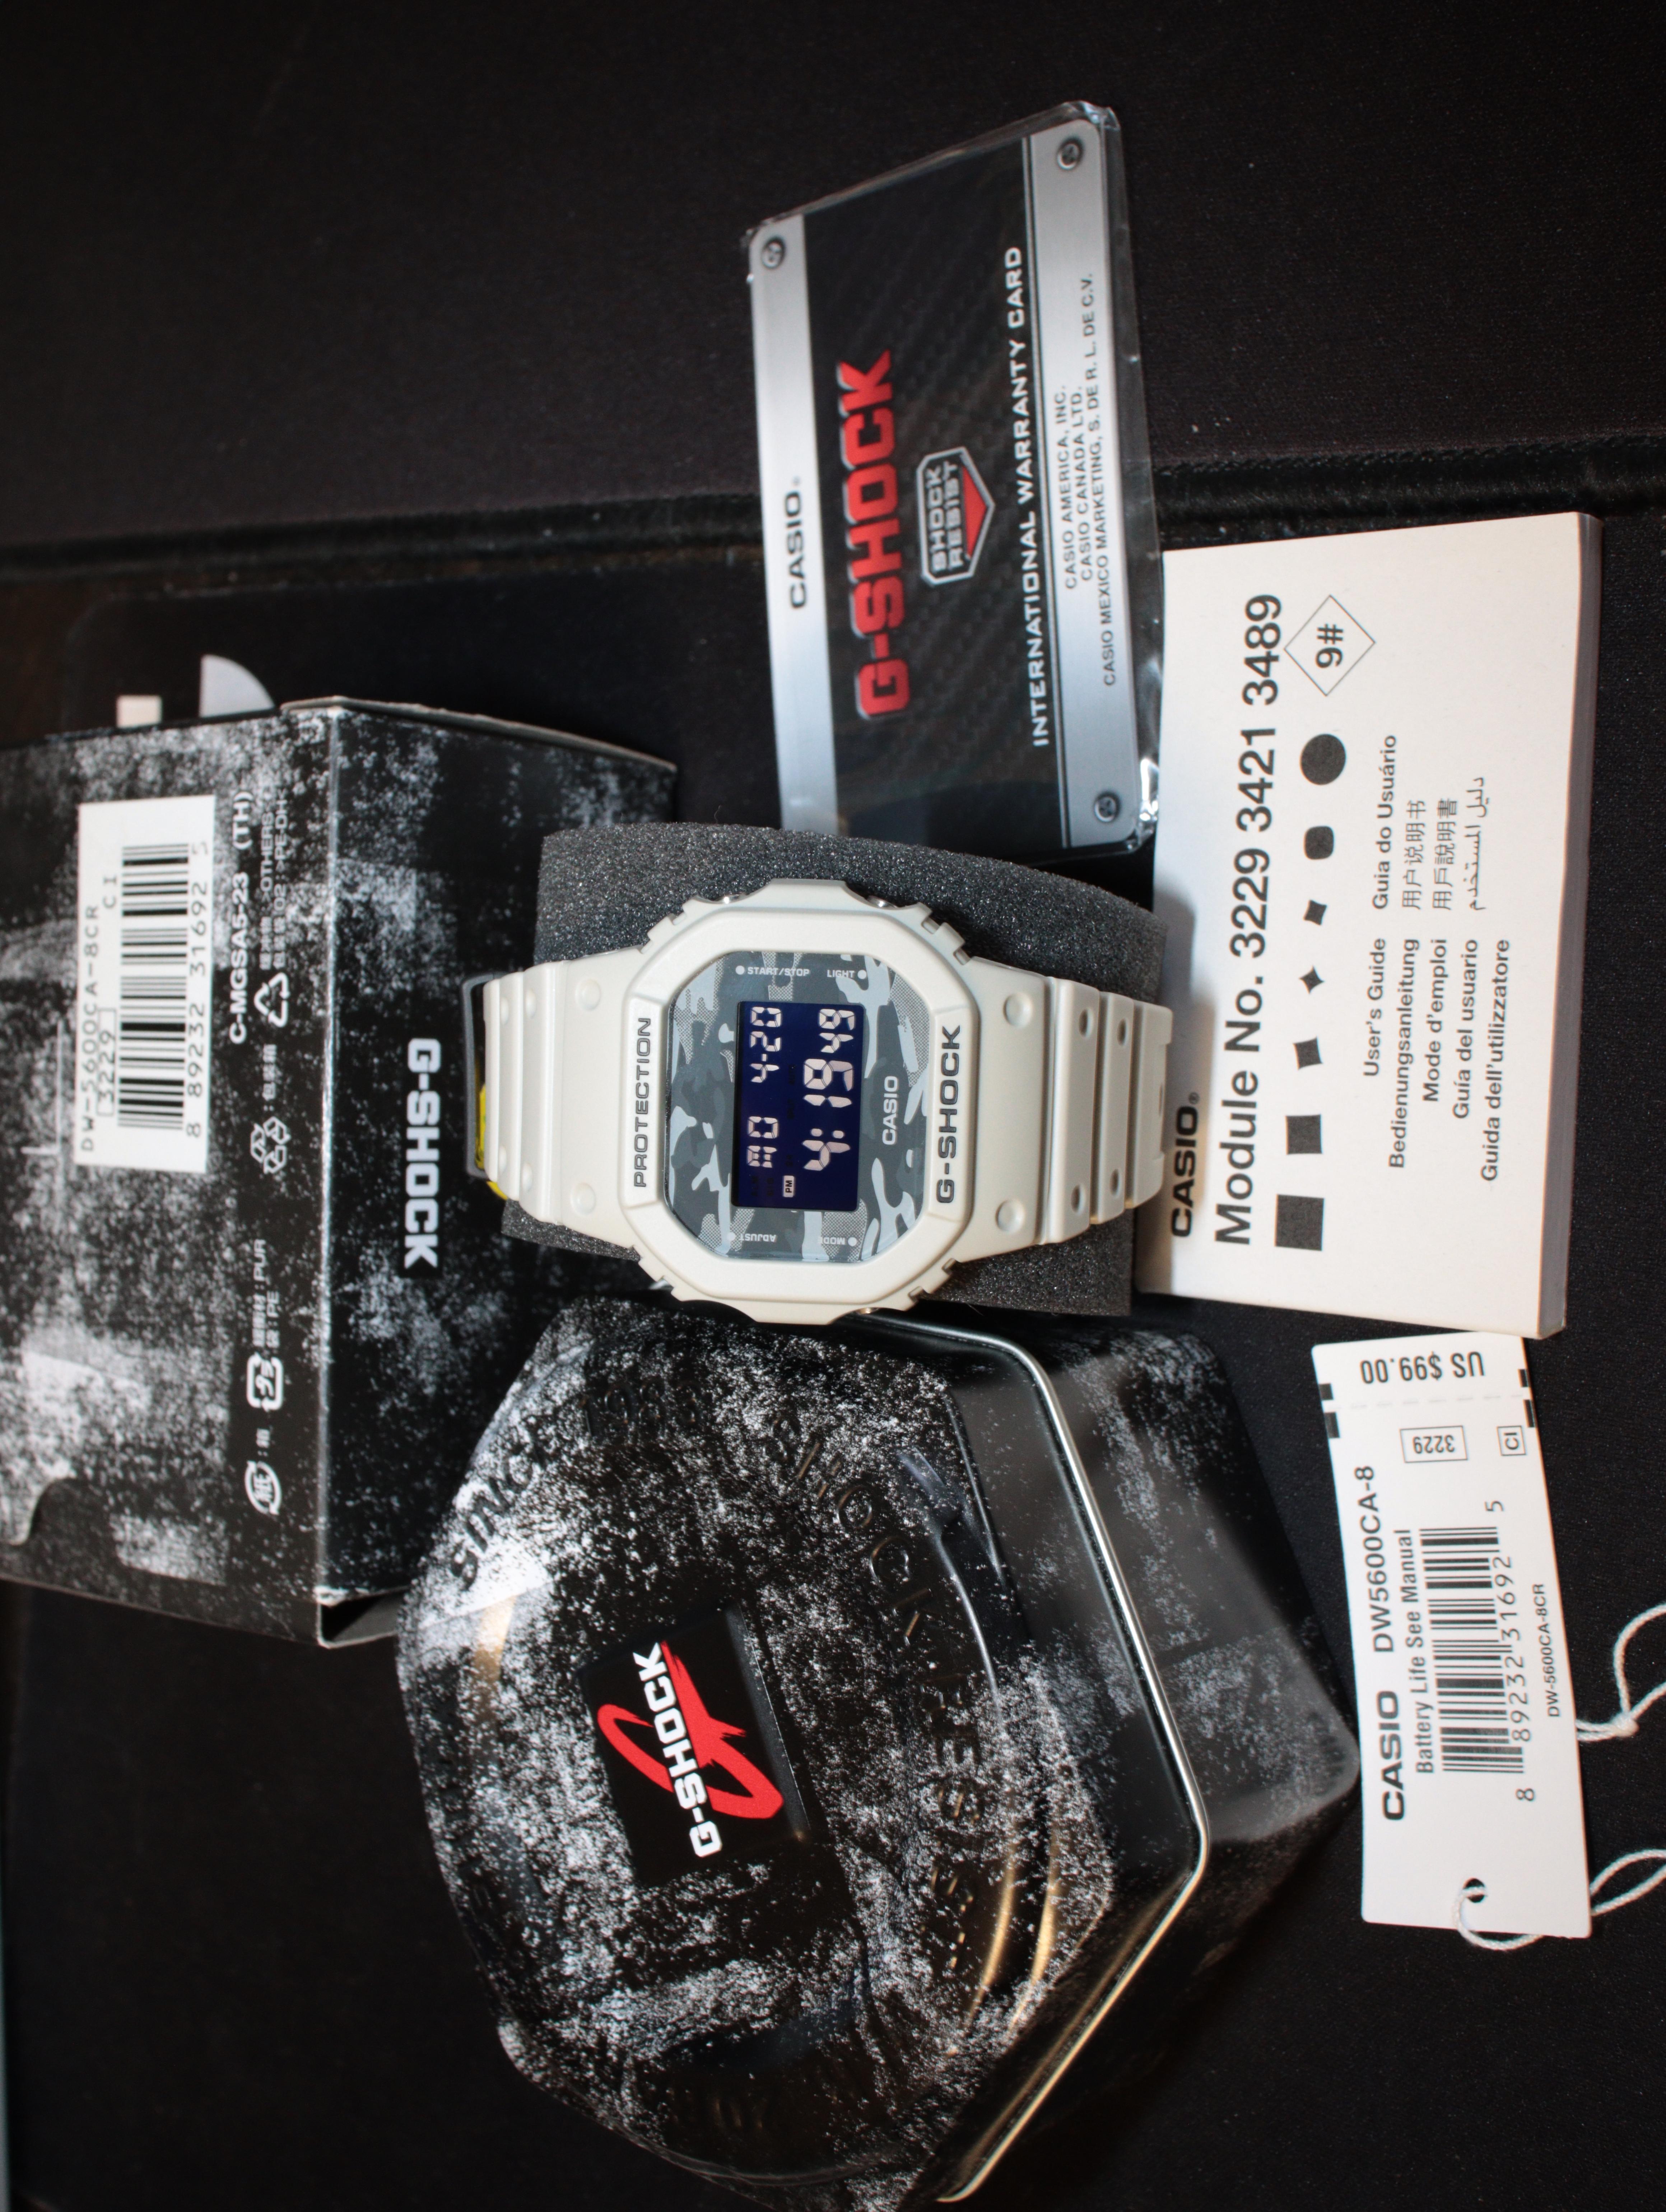 Casio DW5600CA-8 G-Shock WTS] WatchCharts | Marketplace reduced price